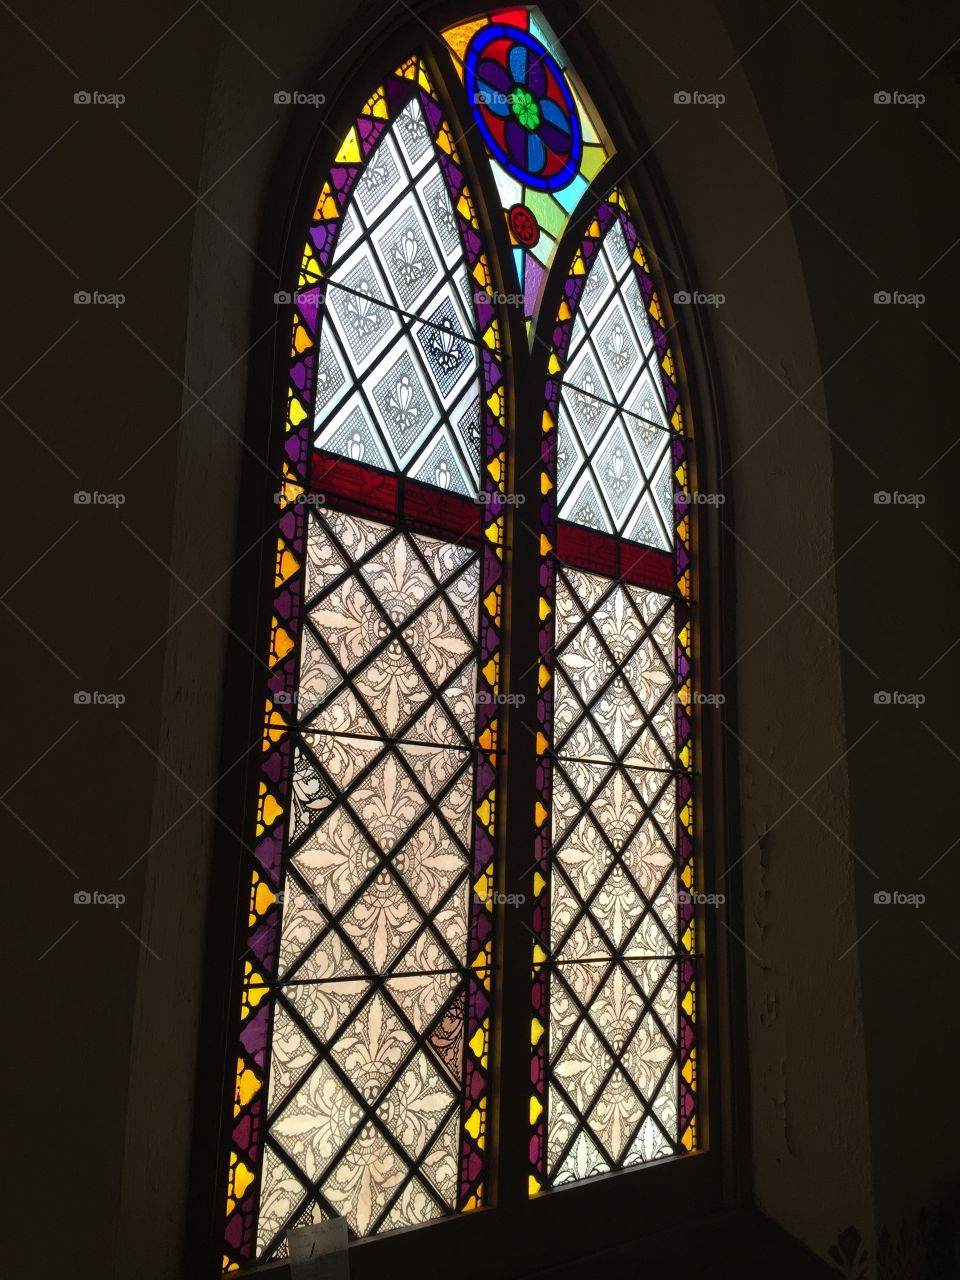 Stained glass
Old church window